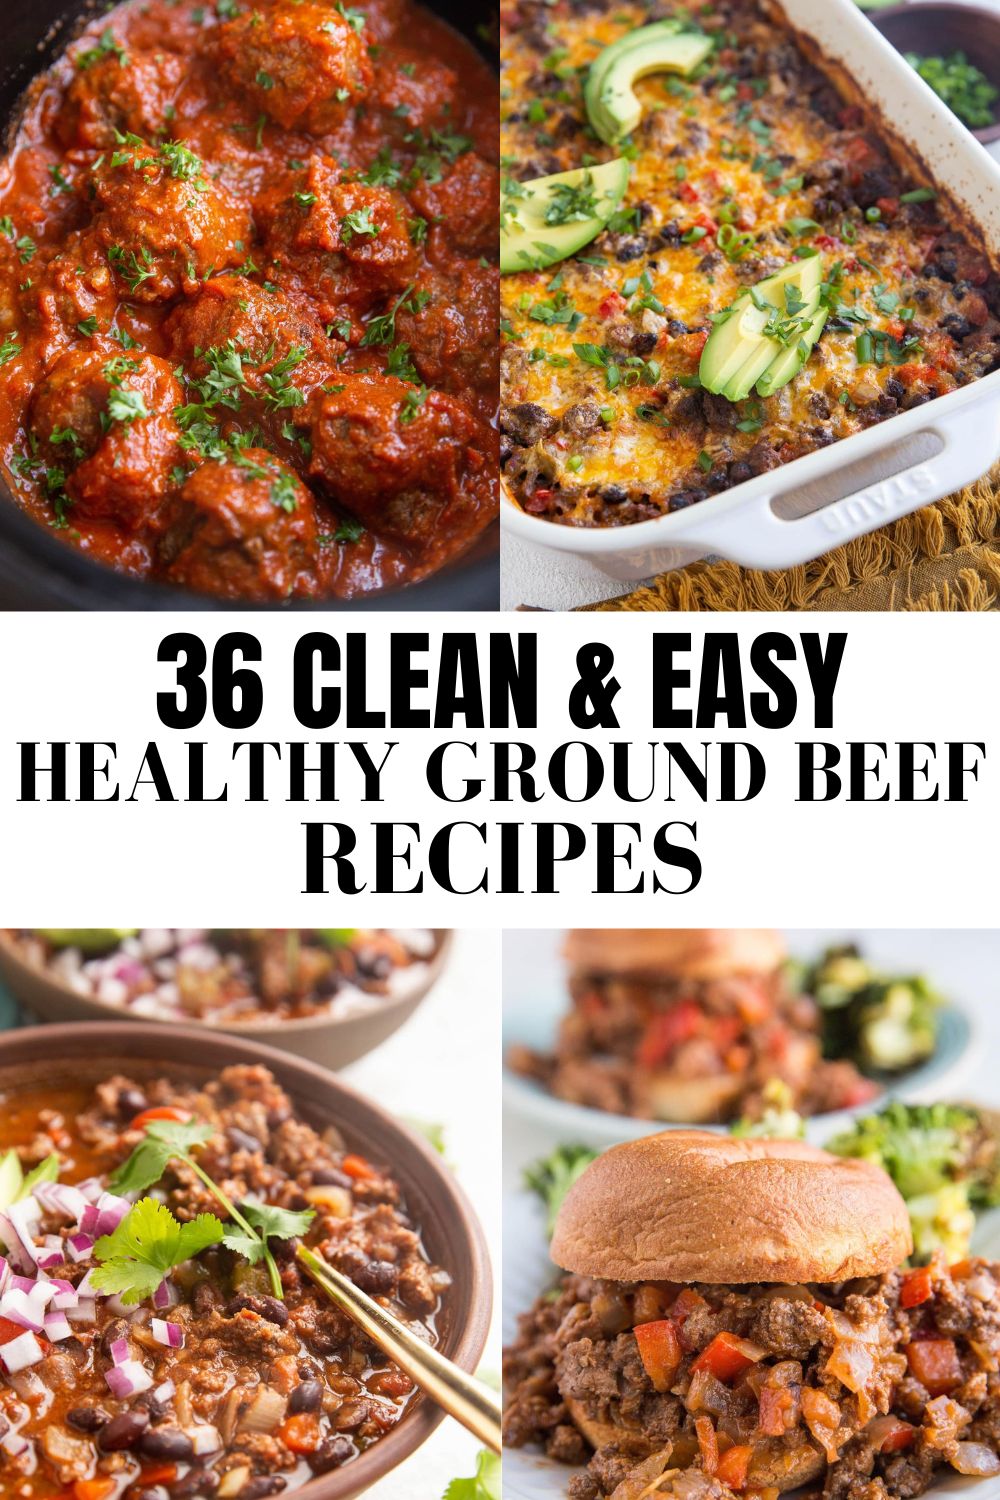 18 Healthy Ground Beef Recipes - easy, delicious gluten-free dinner ideas with keto, whole30 and paleo options